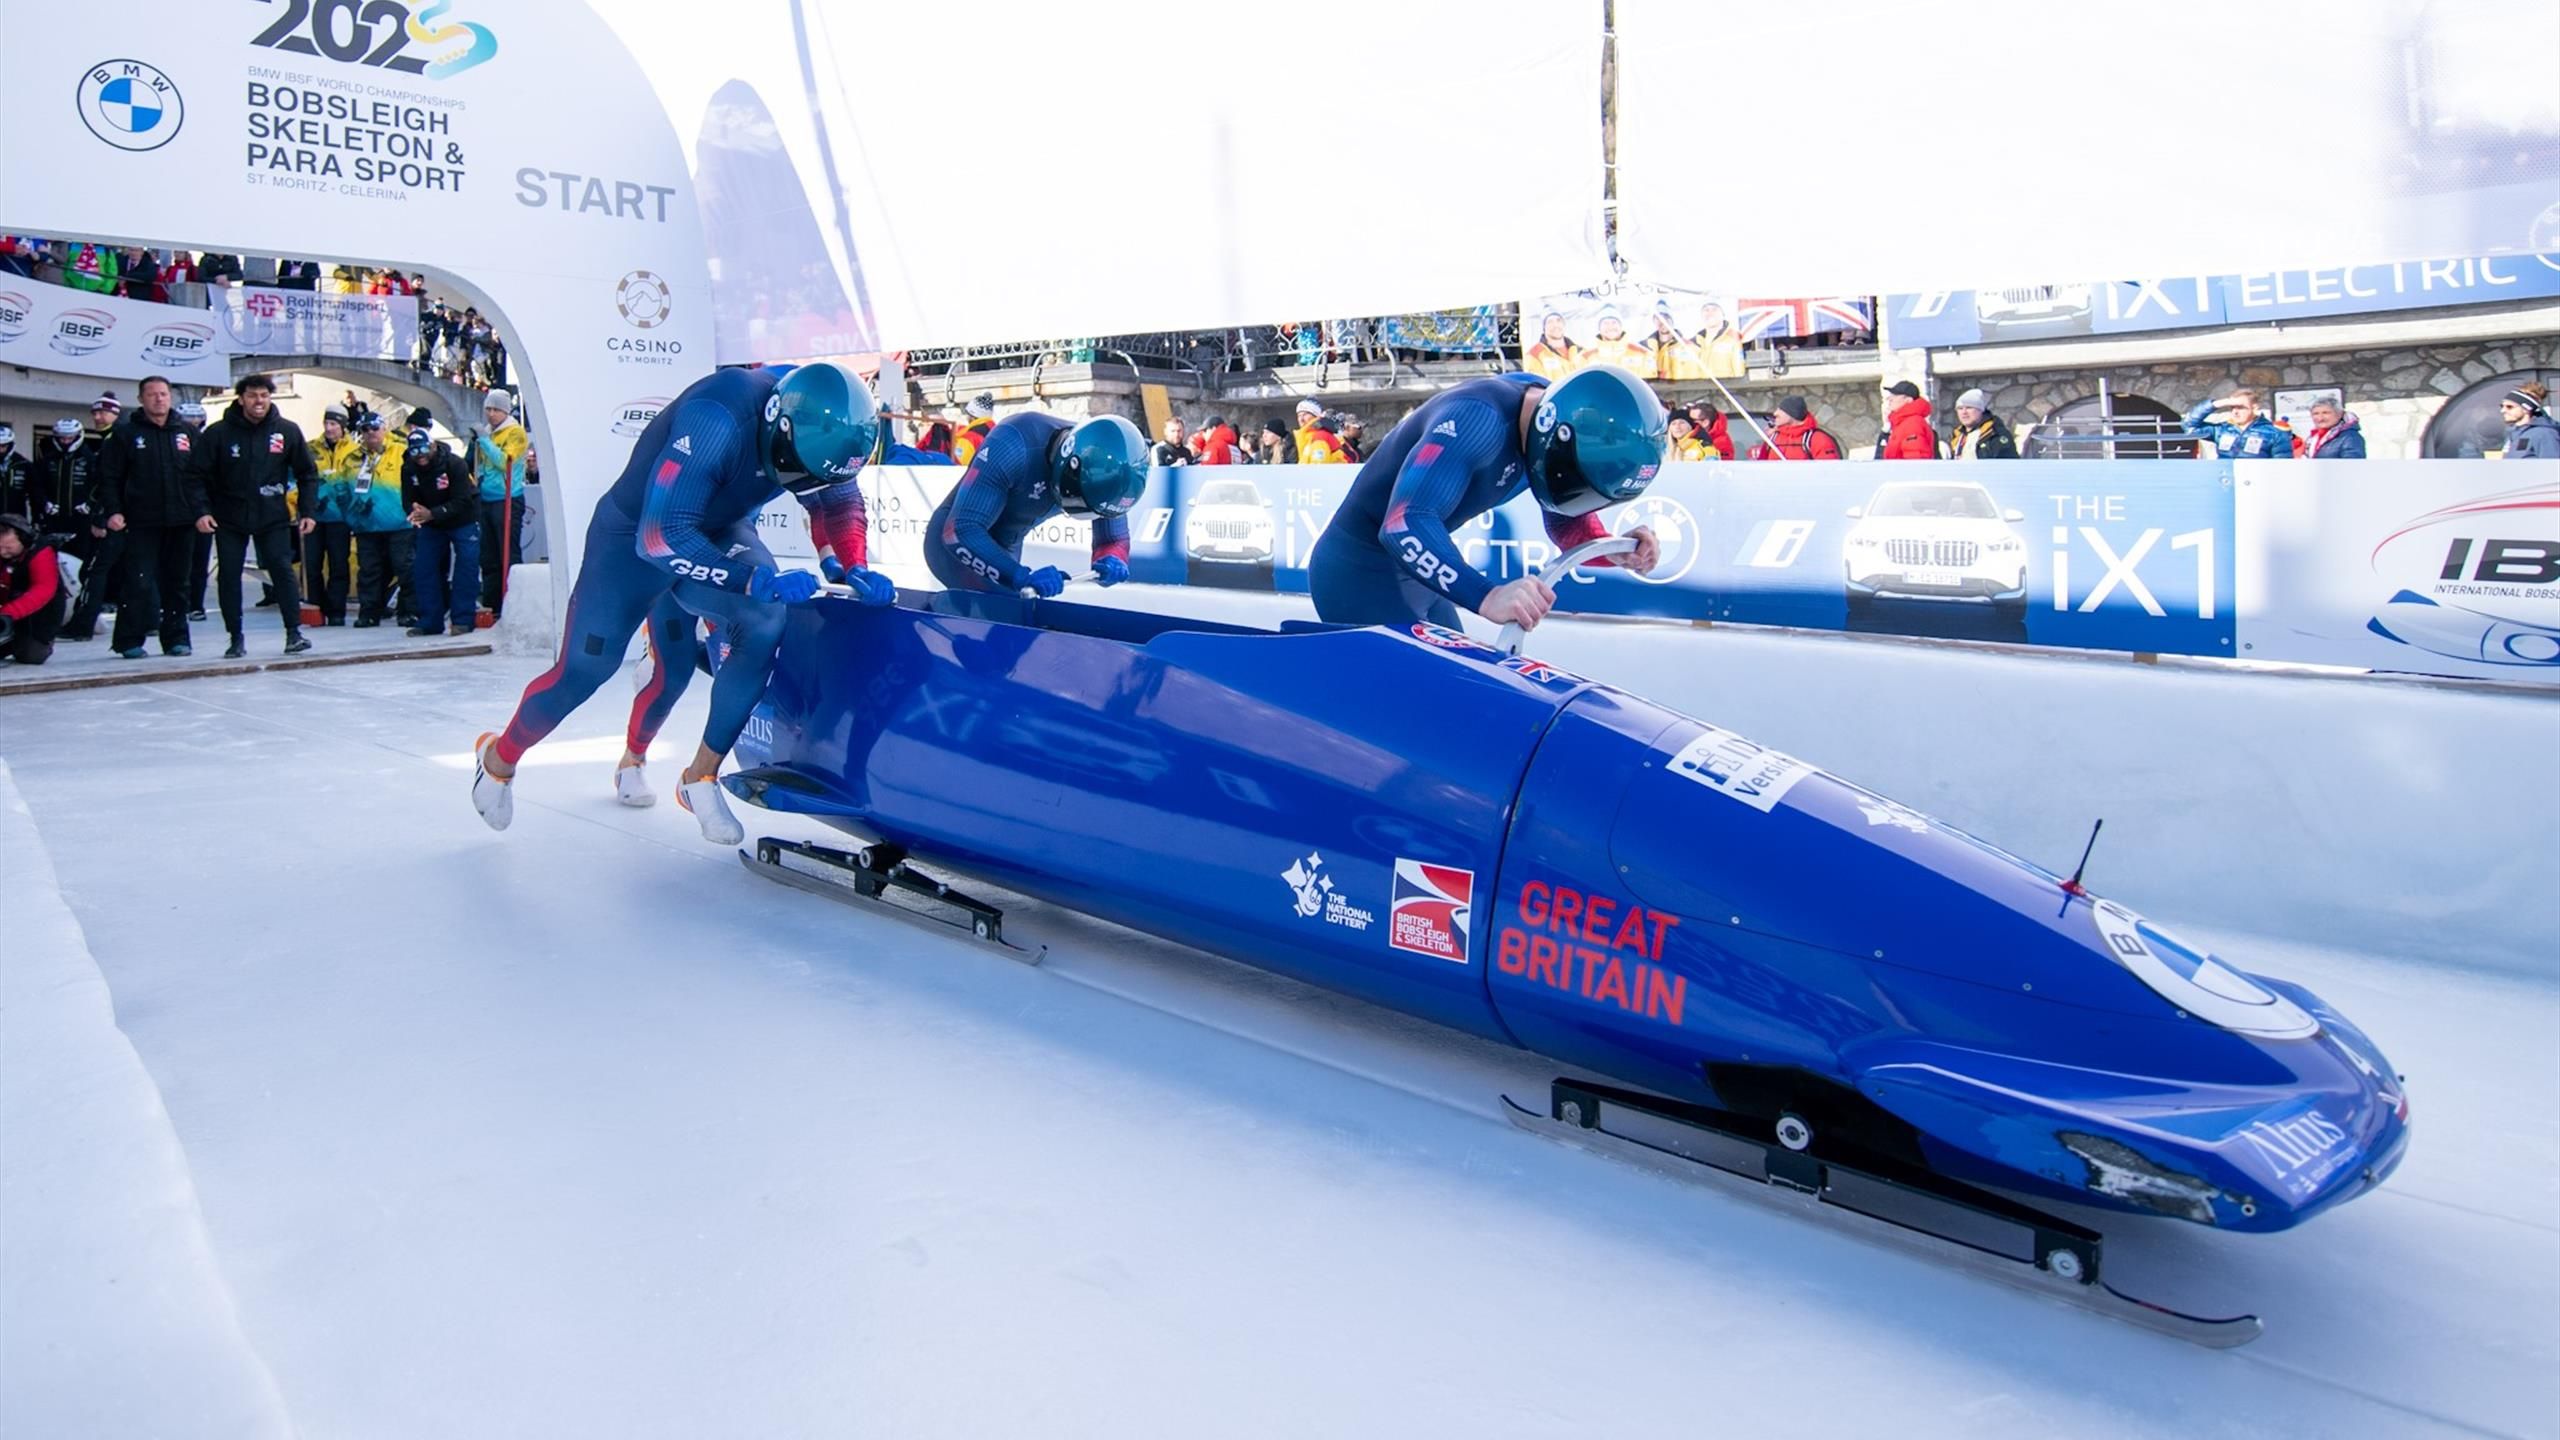 Great Britain win first fourman bobsleigh medal in 84 years with World